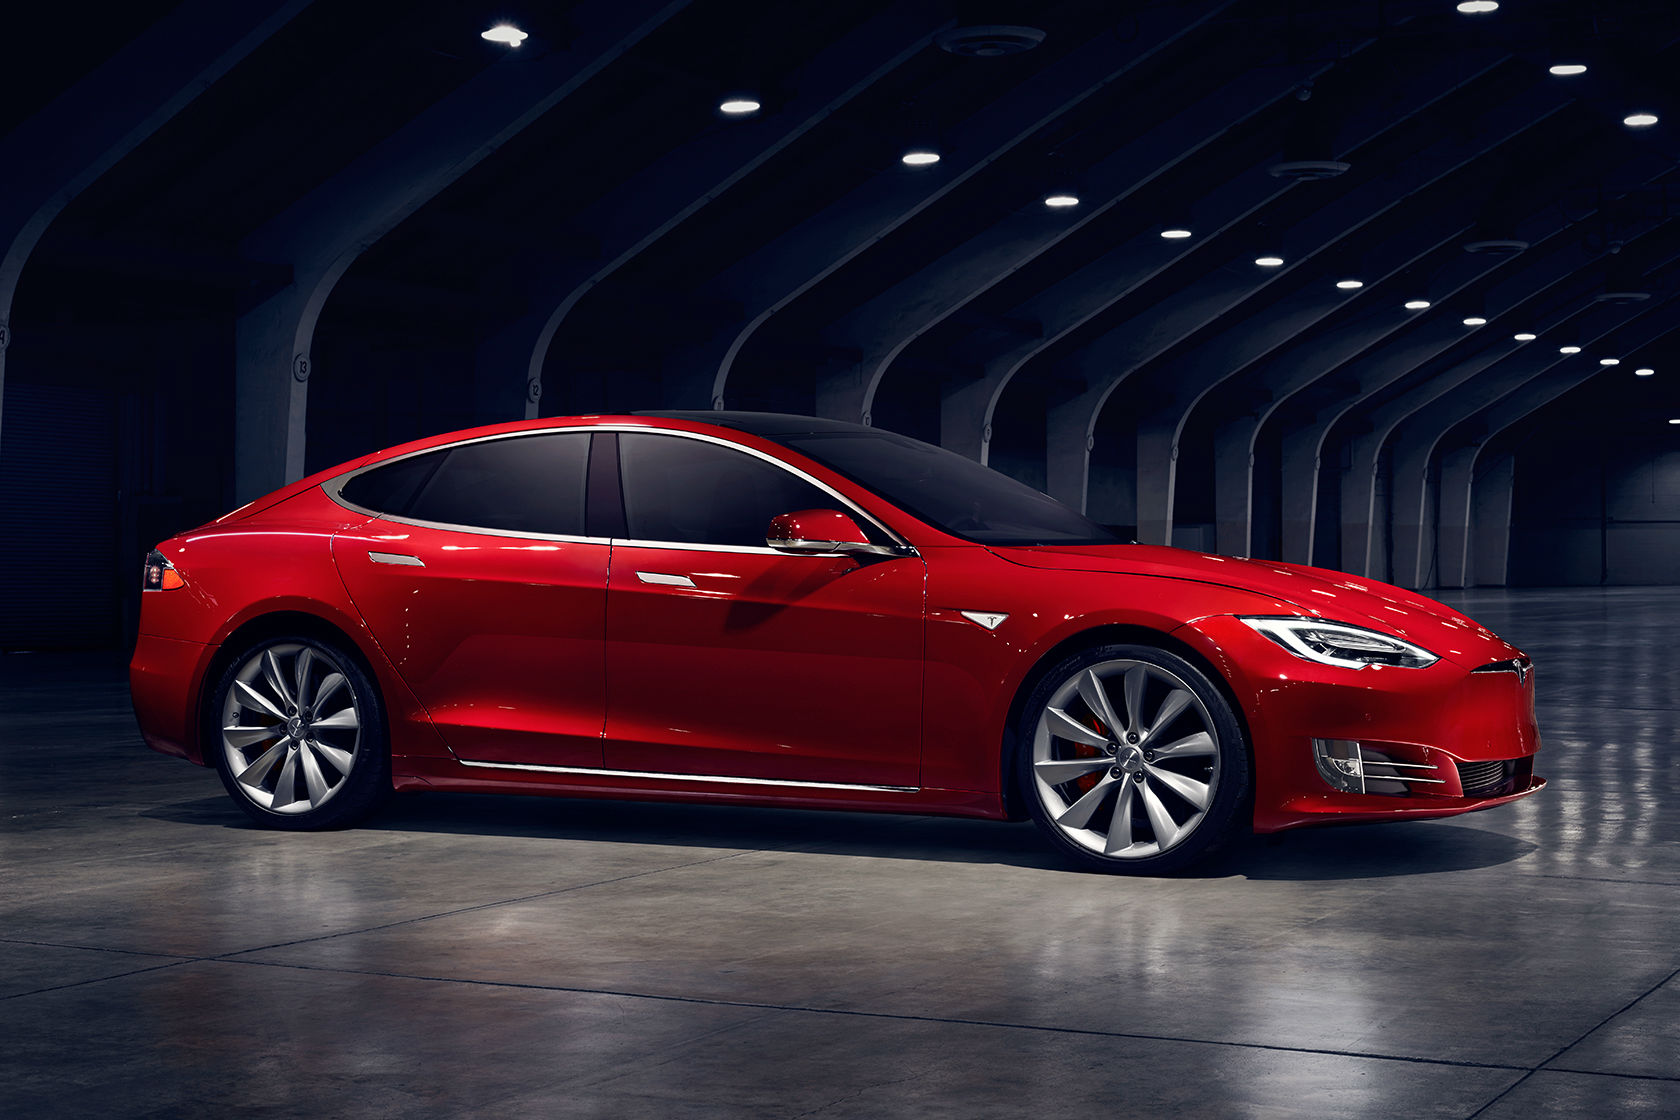 Facelifted Tesla Model S: less grille and more wood